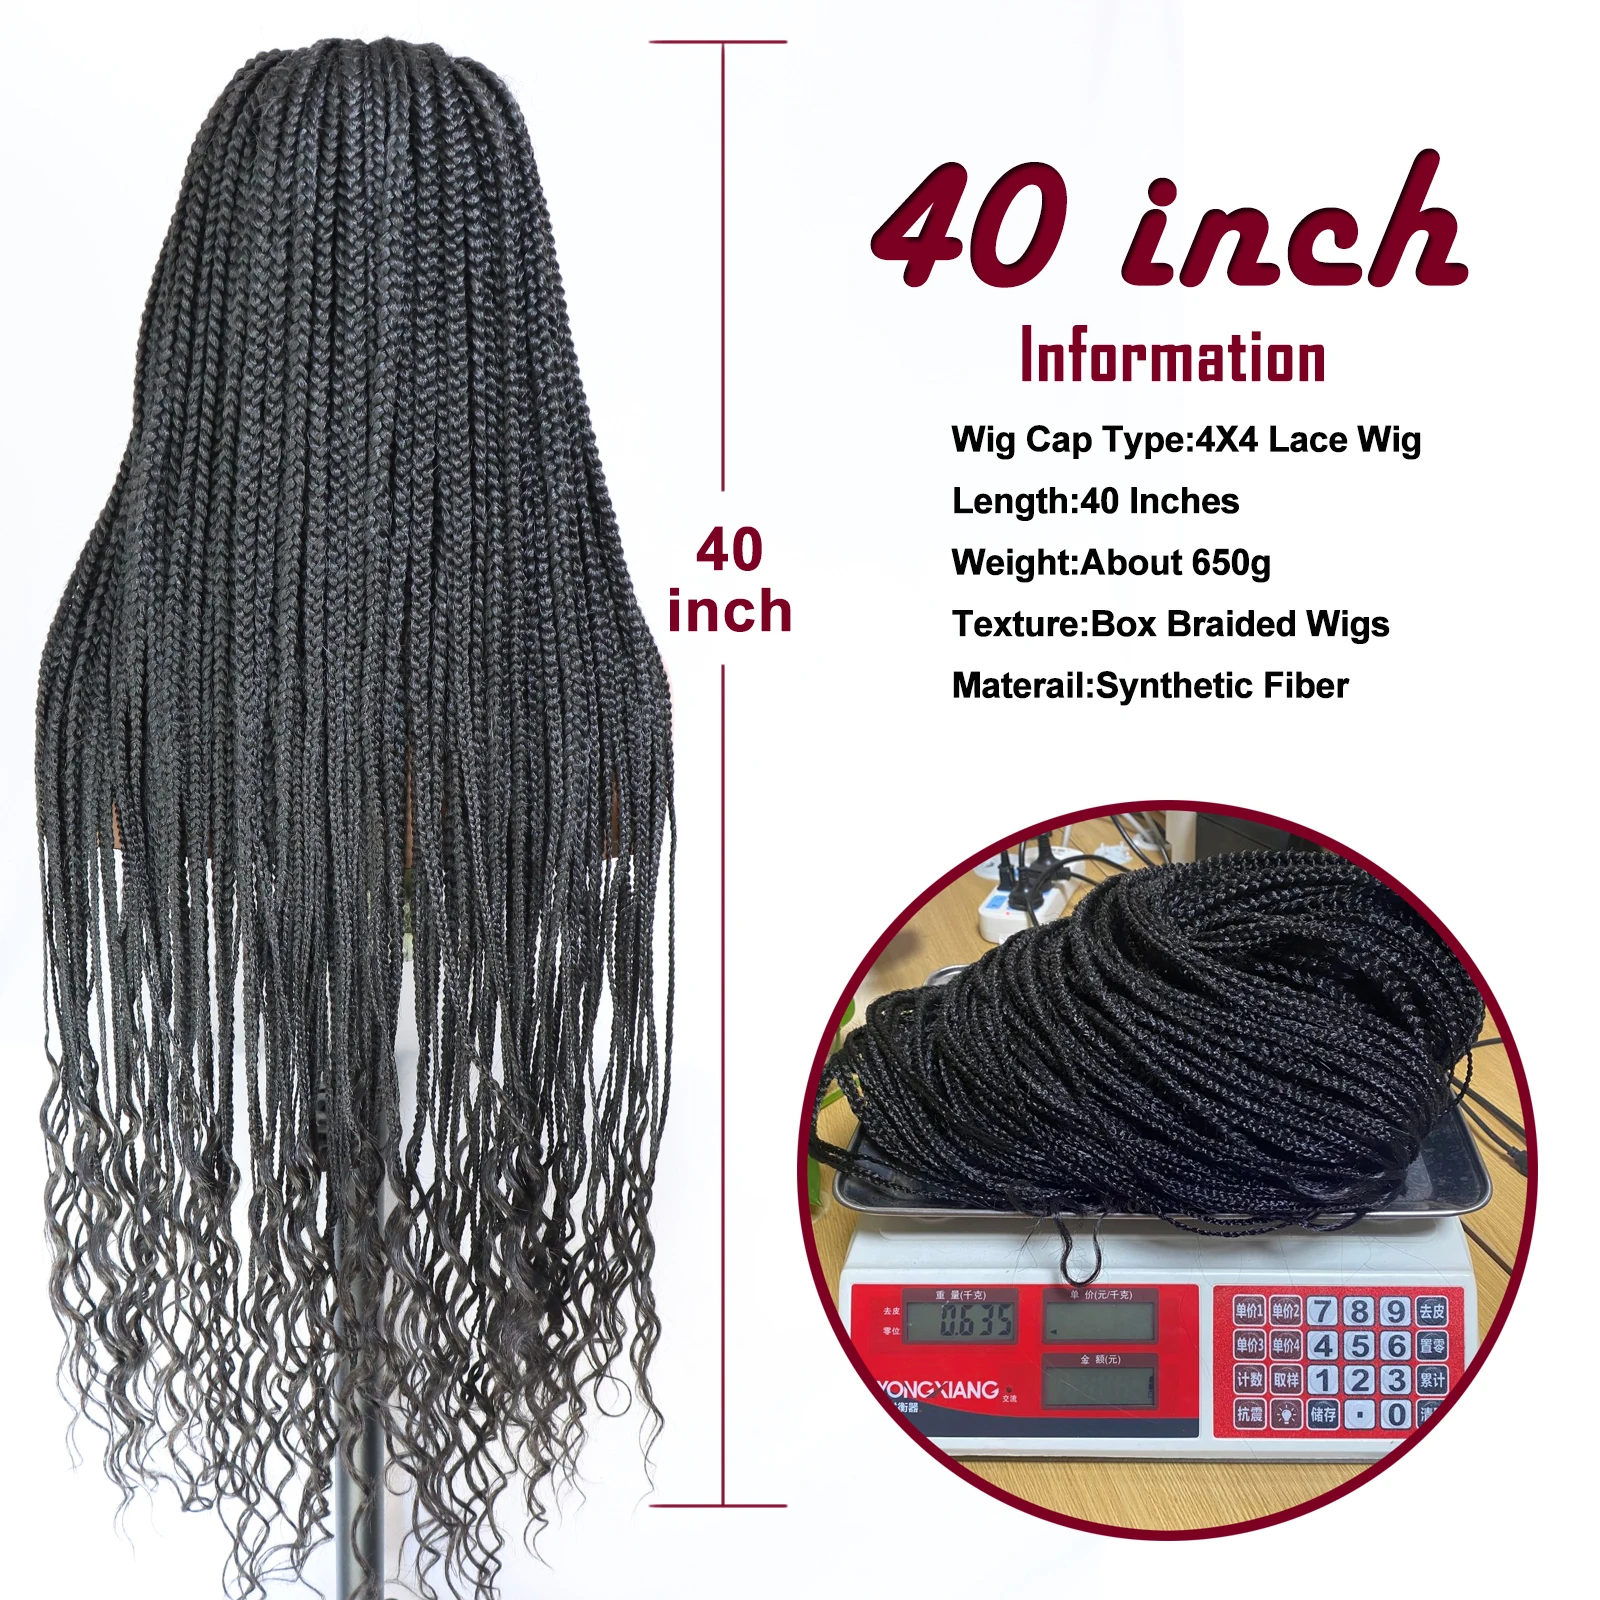 Braided Lace Front Wigs Black 40inch Crochet Braid Hair Extensions Swiss Lace Wig Synthetic American African Wig for Black Women